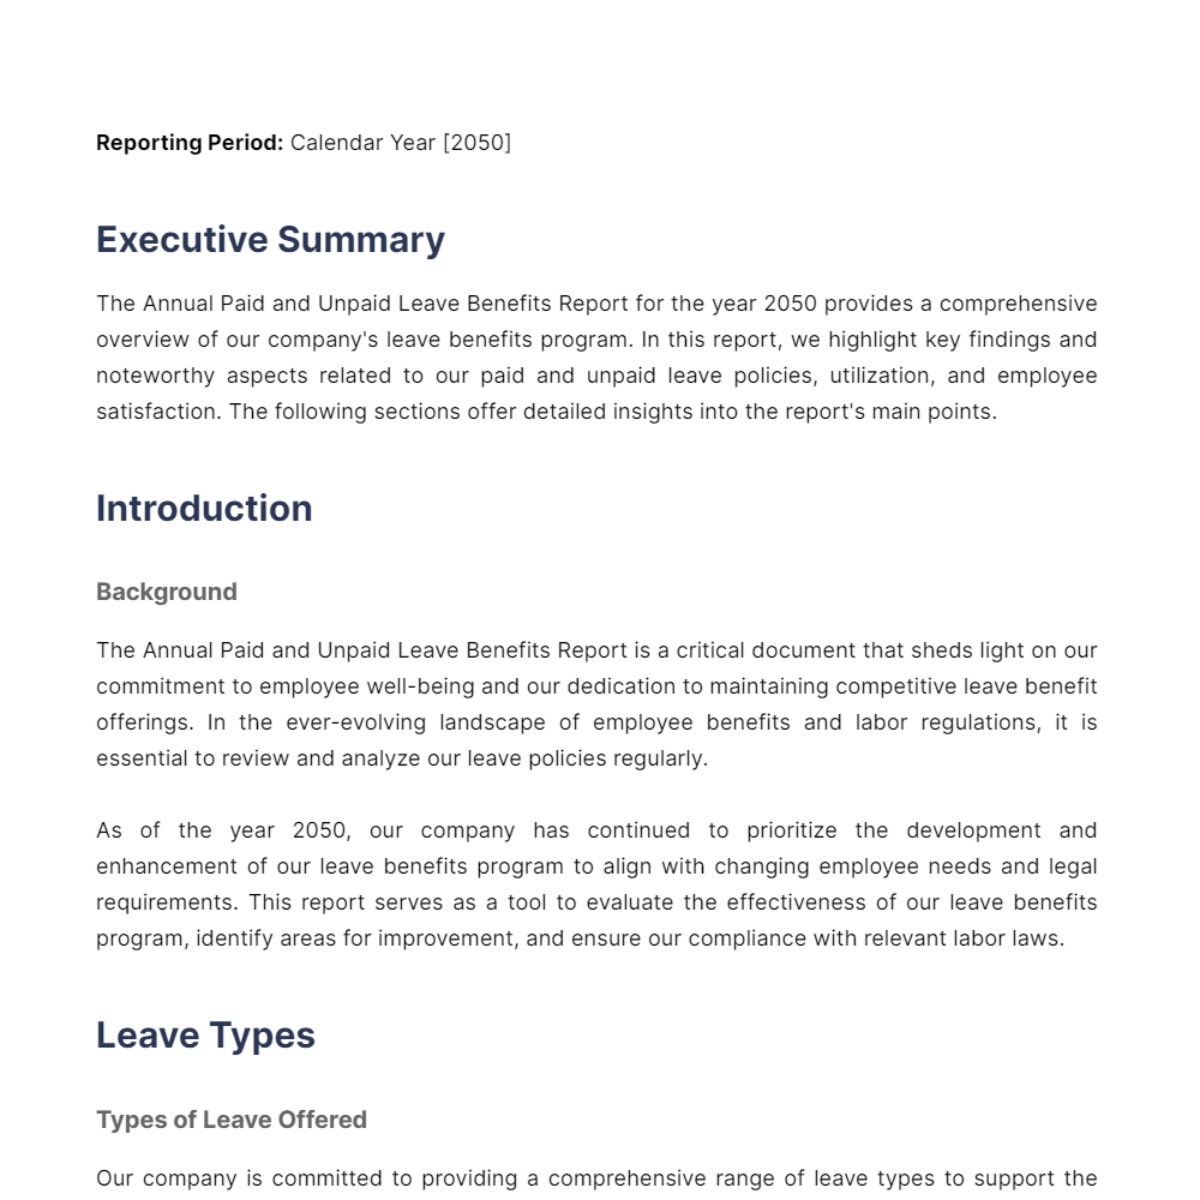 Free Annual Paid and Unpaid Leave Benefits Report HR Template